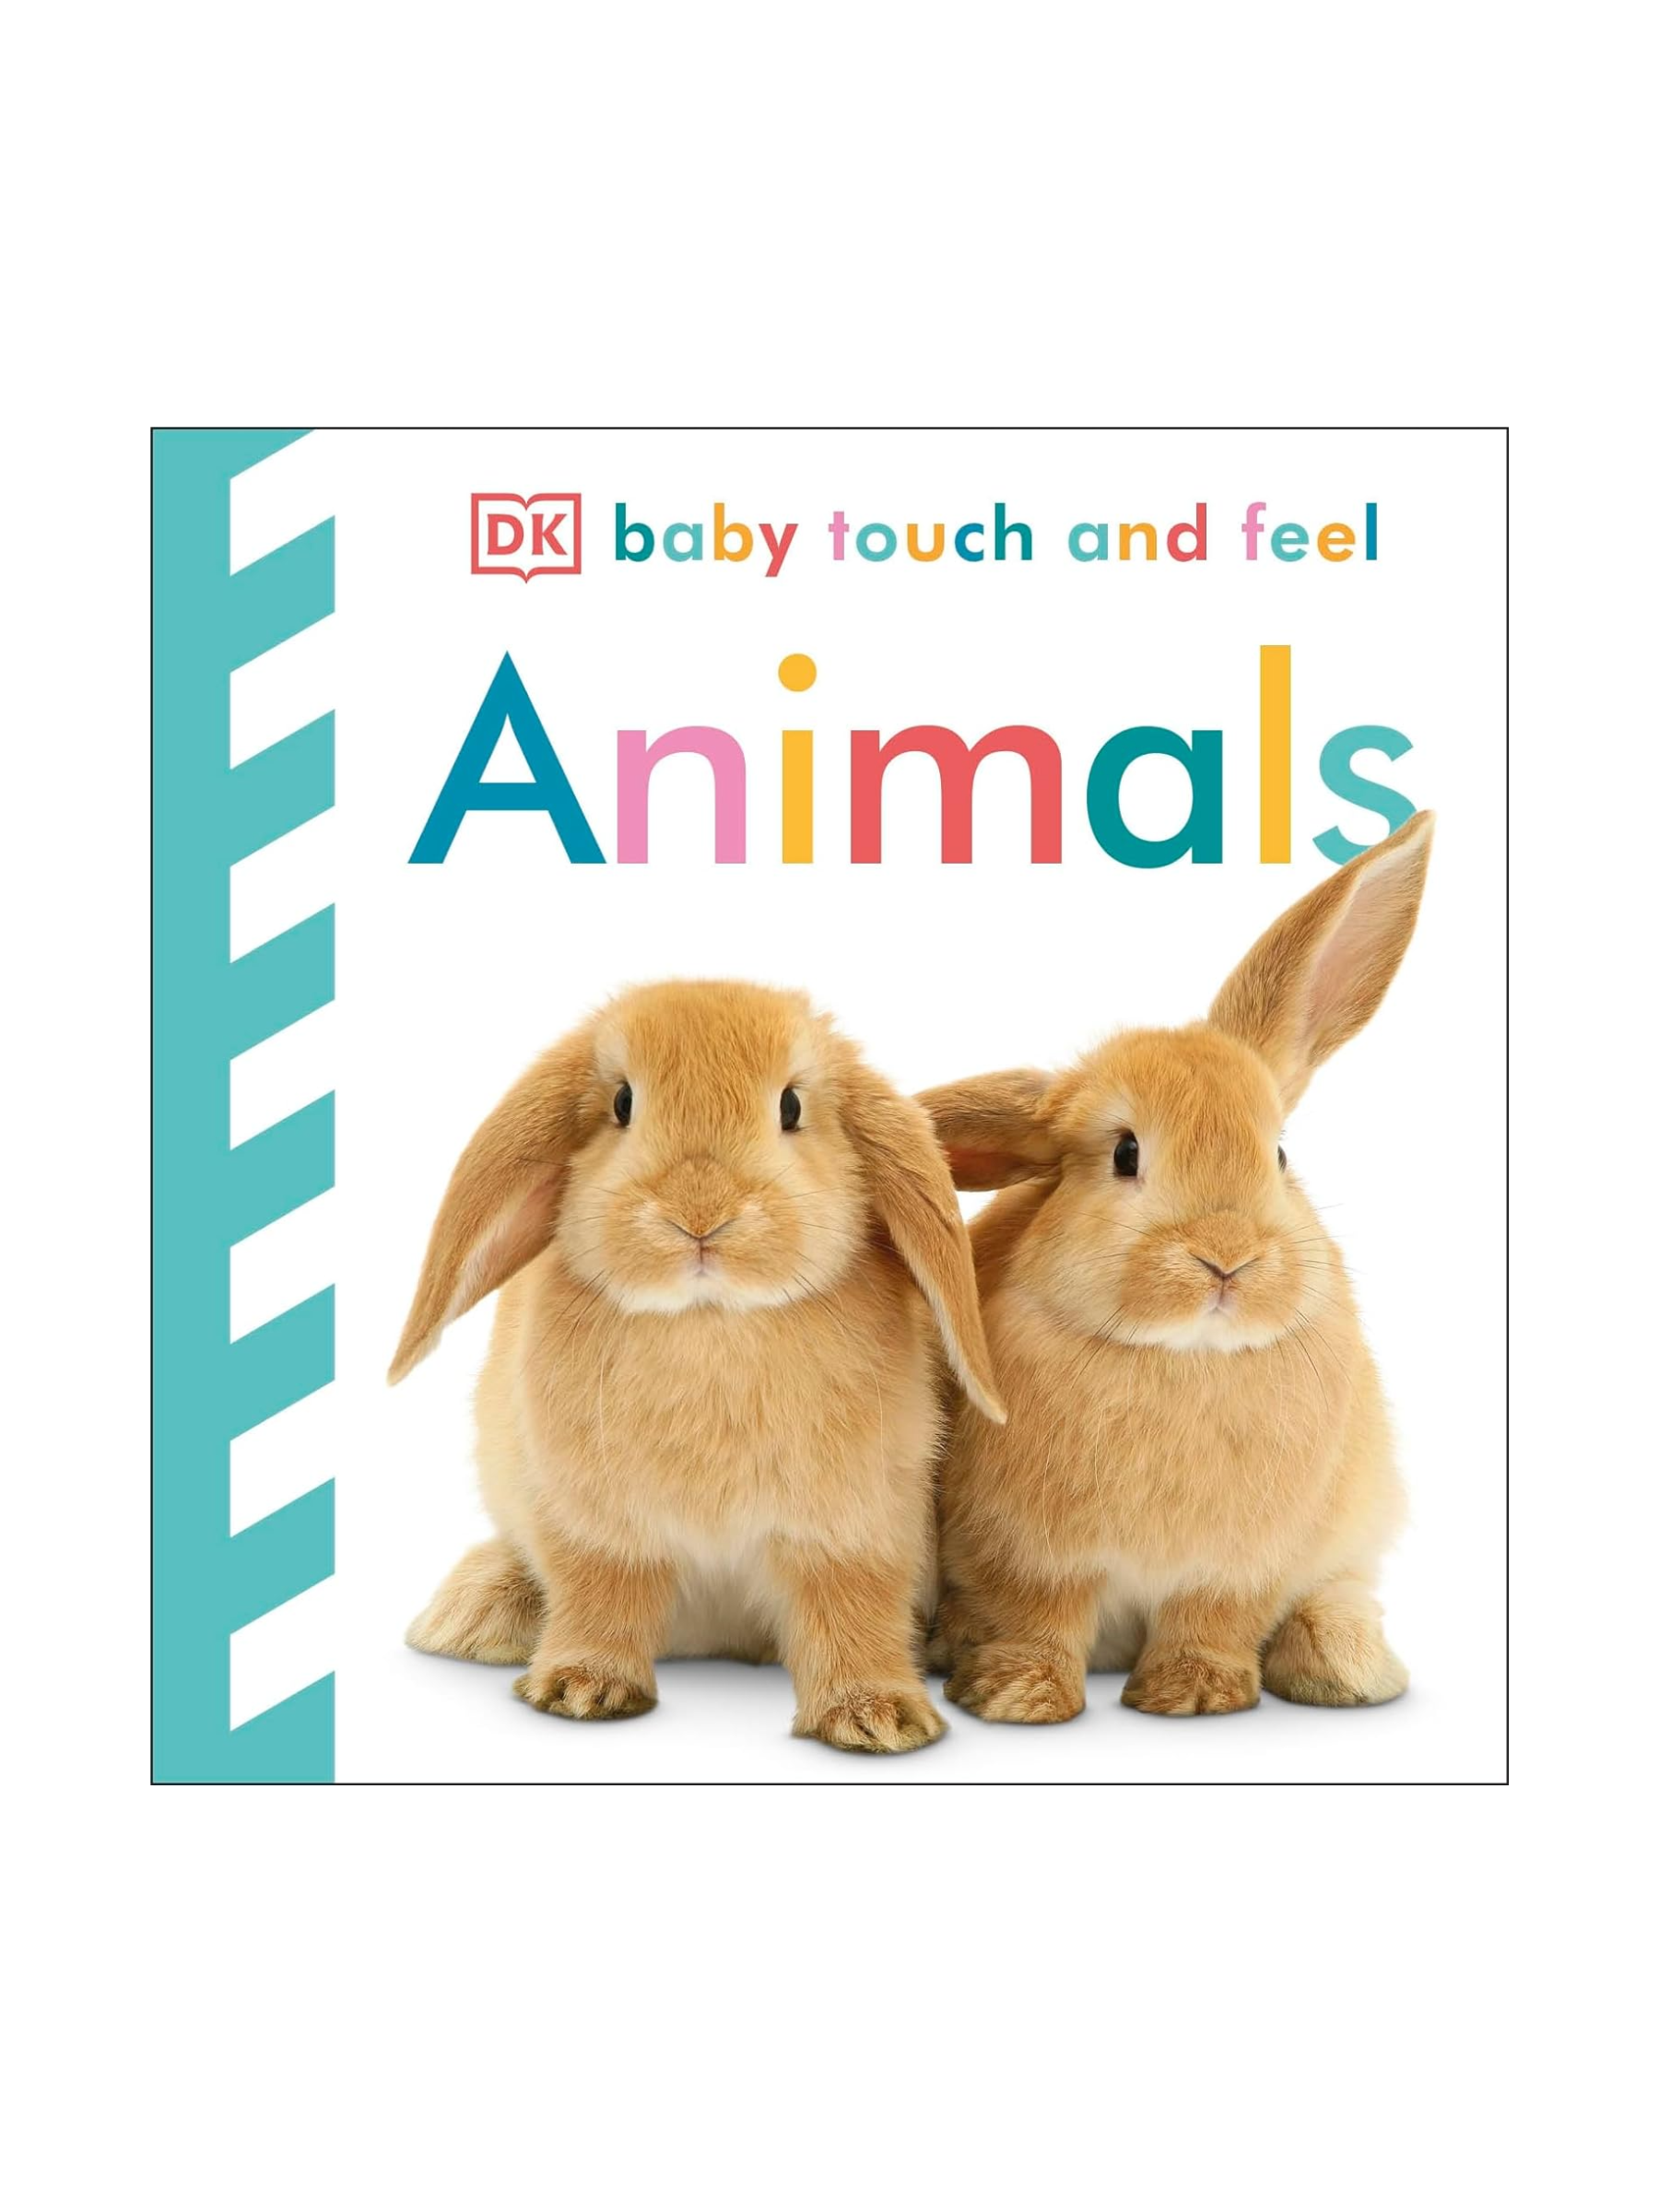 <p>Babies and toddlers love touch-and-feel books, but we're partial to this series because they are the perfect size for small hands to hold all on their own.</p> <p><strong>What our expert says:</strong> I’ll never forget the blessed moment when my husband and I realized that my then 11-month-old was sitting and “reading” this book to herself in total silence—and then continued for a solid 30 minutes. We were able to…have a conversation? It was bliss. <em>-SM</em></p> $4, Amazon. <a href="https://www.amazon.com/Baby-Touch-Feel-Animals-DK/dp/0756634687/ref=sr_1_8?">Get it now!</a><p>Sign up for today’s biggest stories, from pop culture to politics.</p><a href="https://www.glamour.com/newsletter/news?sourceCode=msnsend">Sign Up</a>